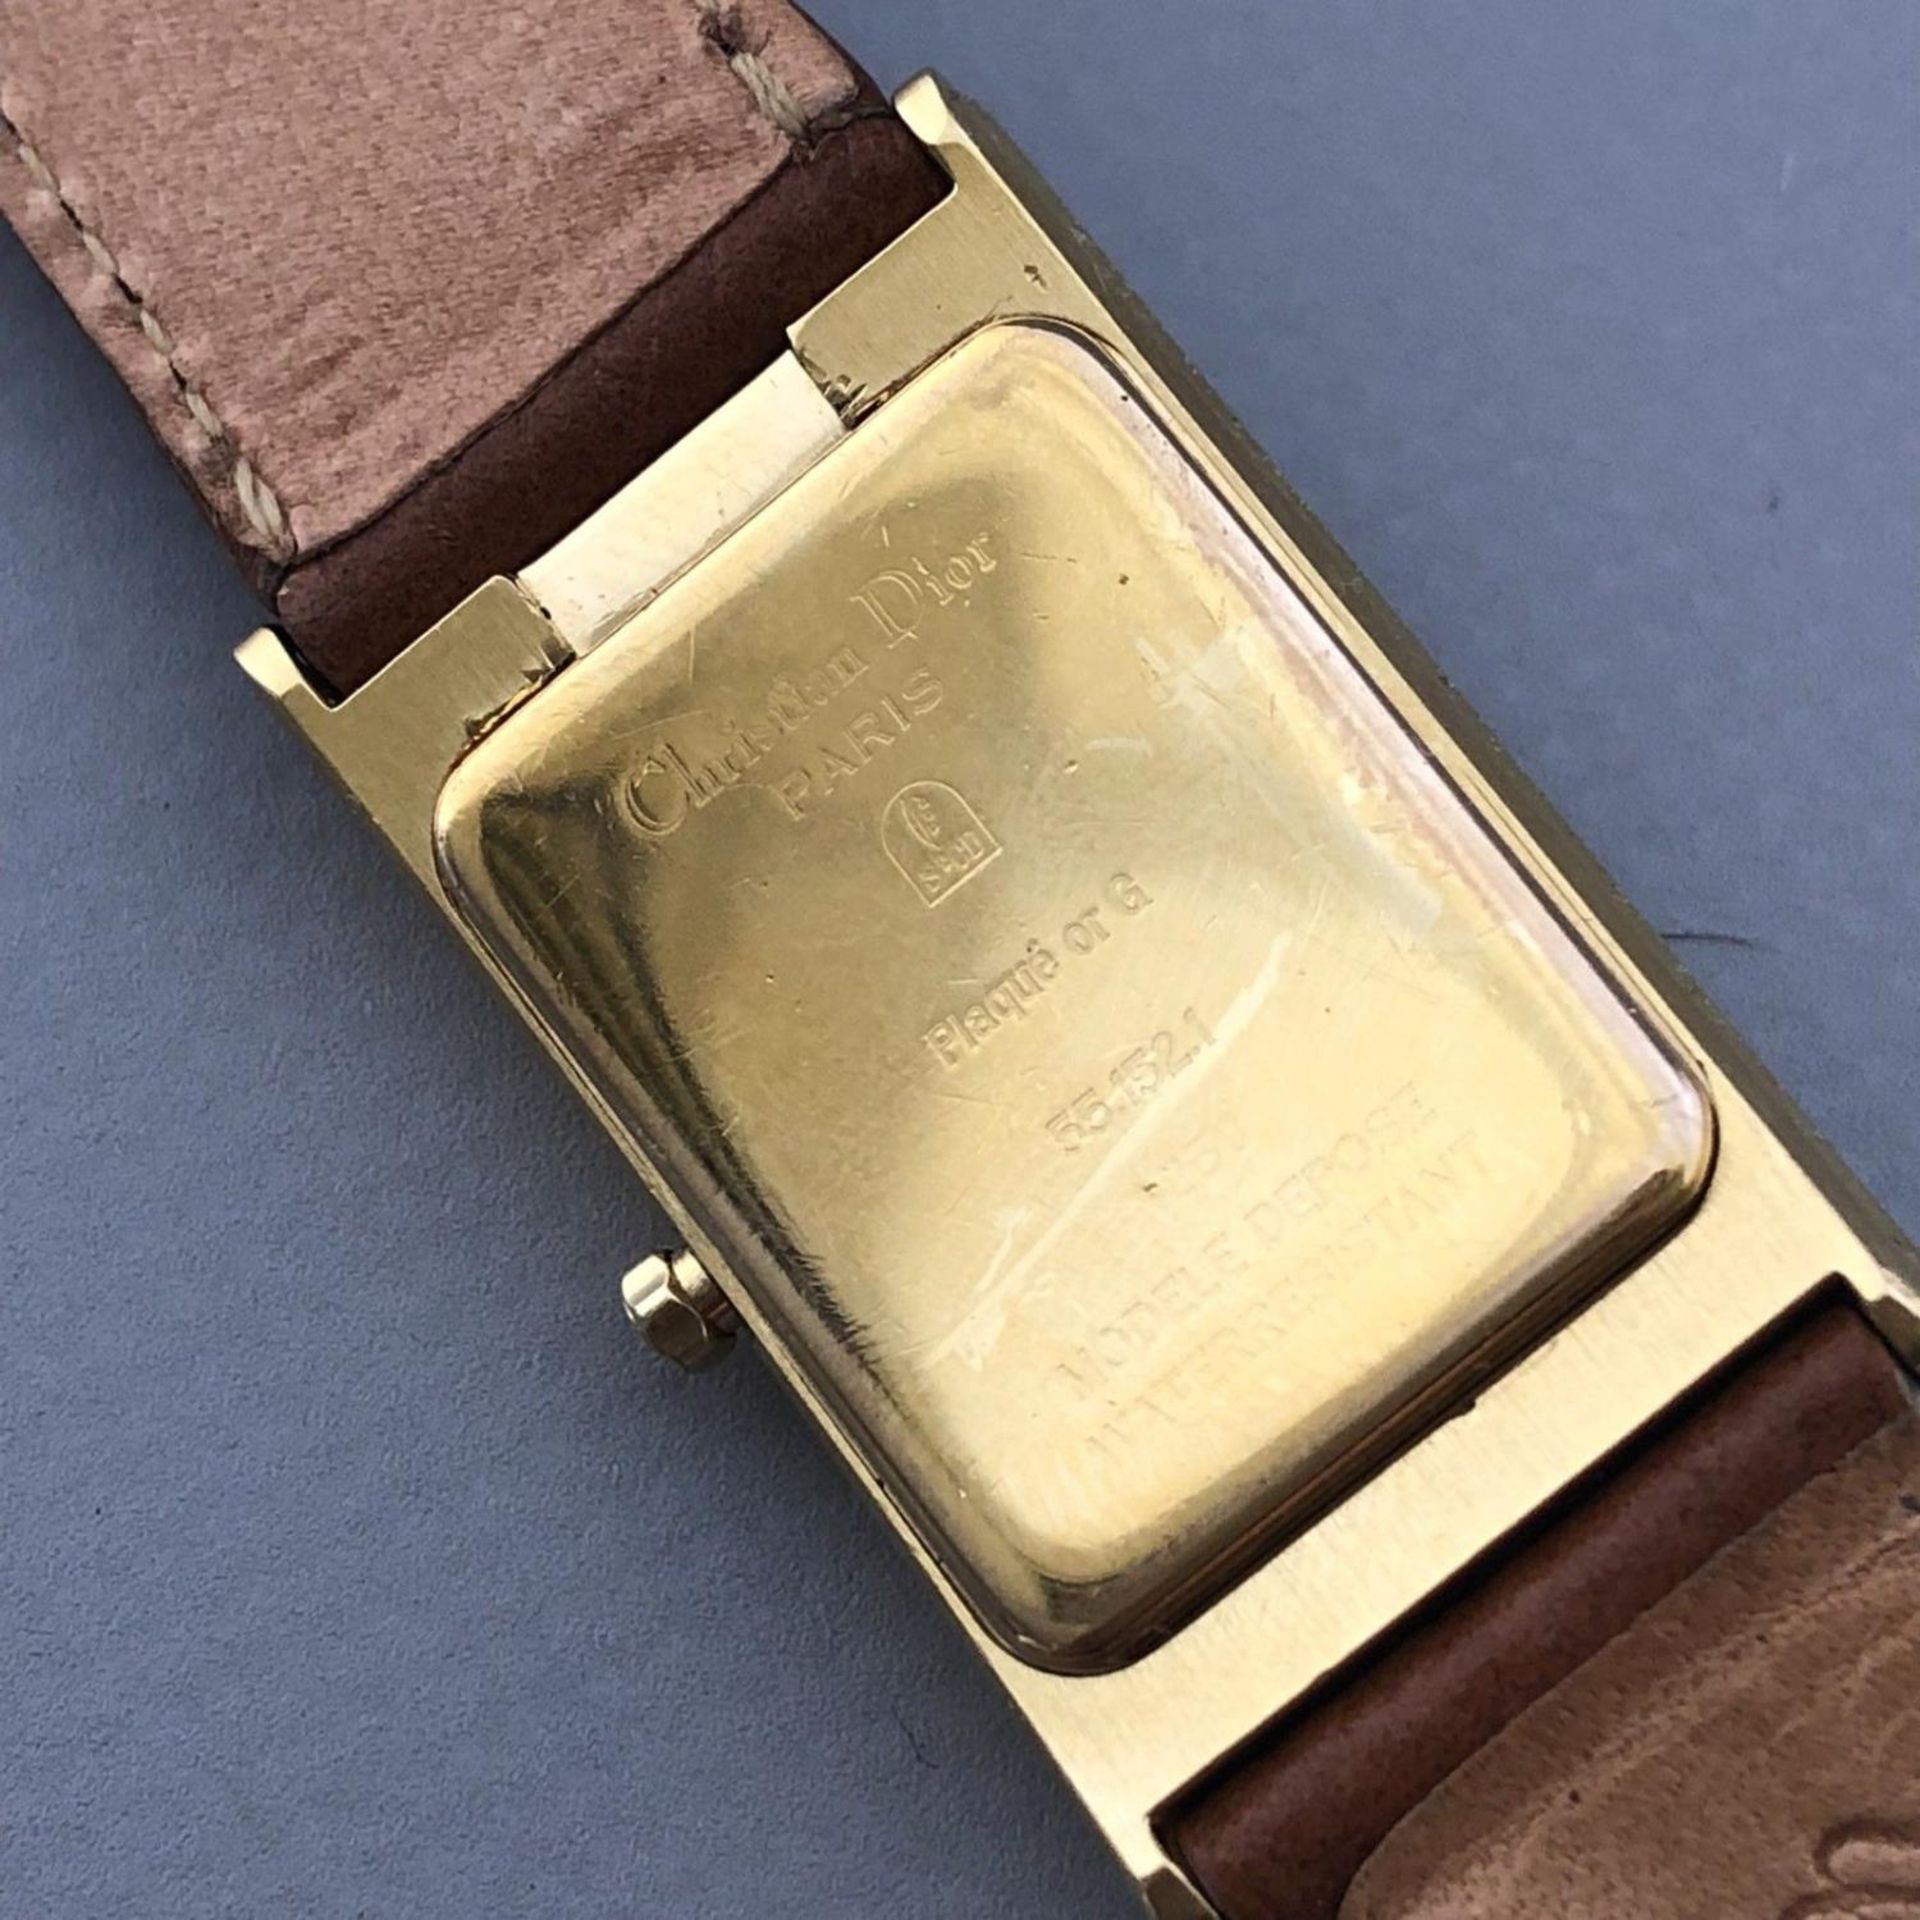 Retro Christian Dior Modele Depose Ladies Watch Gold Plated Tan Leather Strap - Image 5 of 8